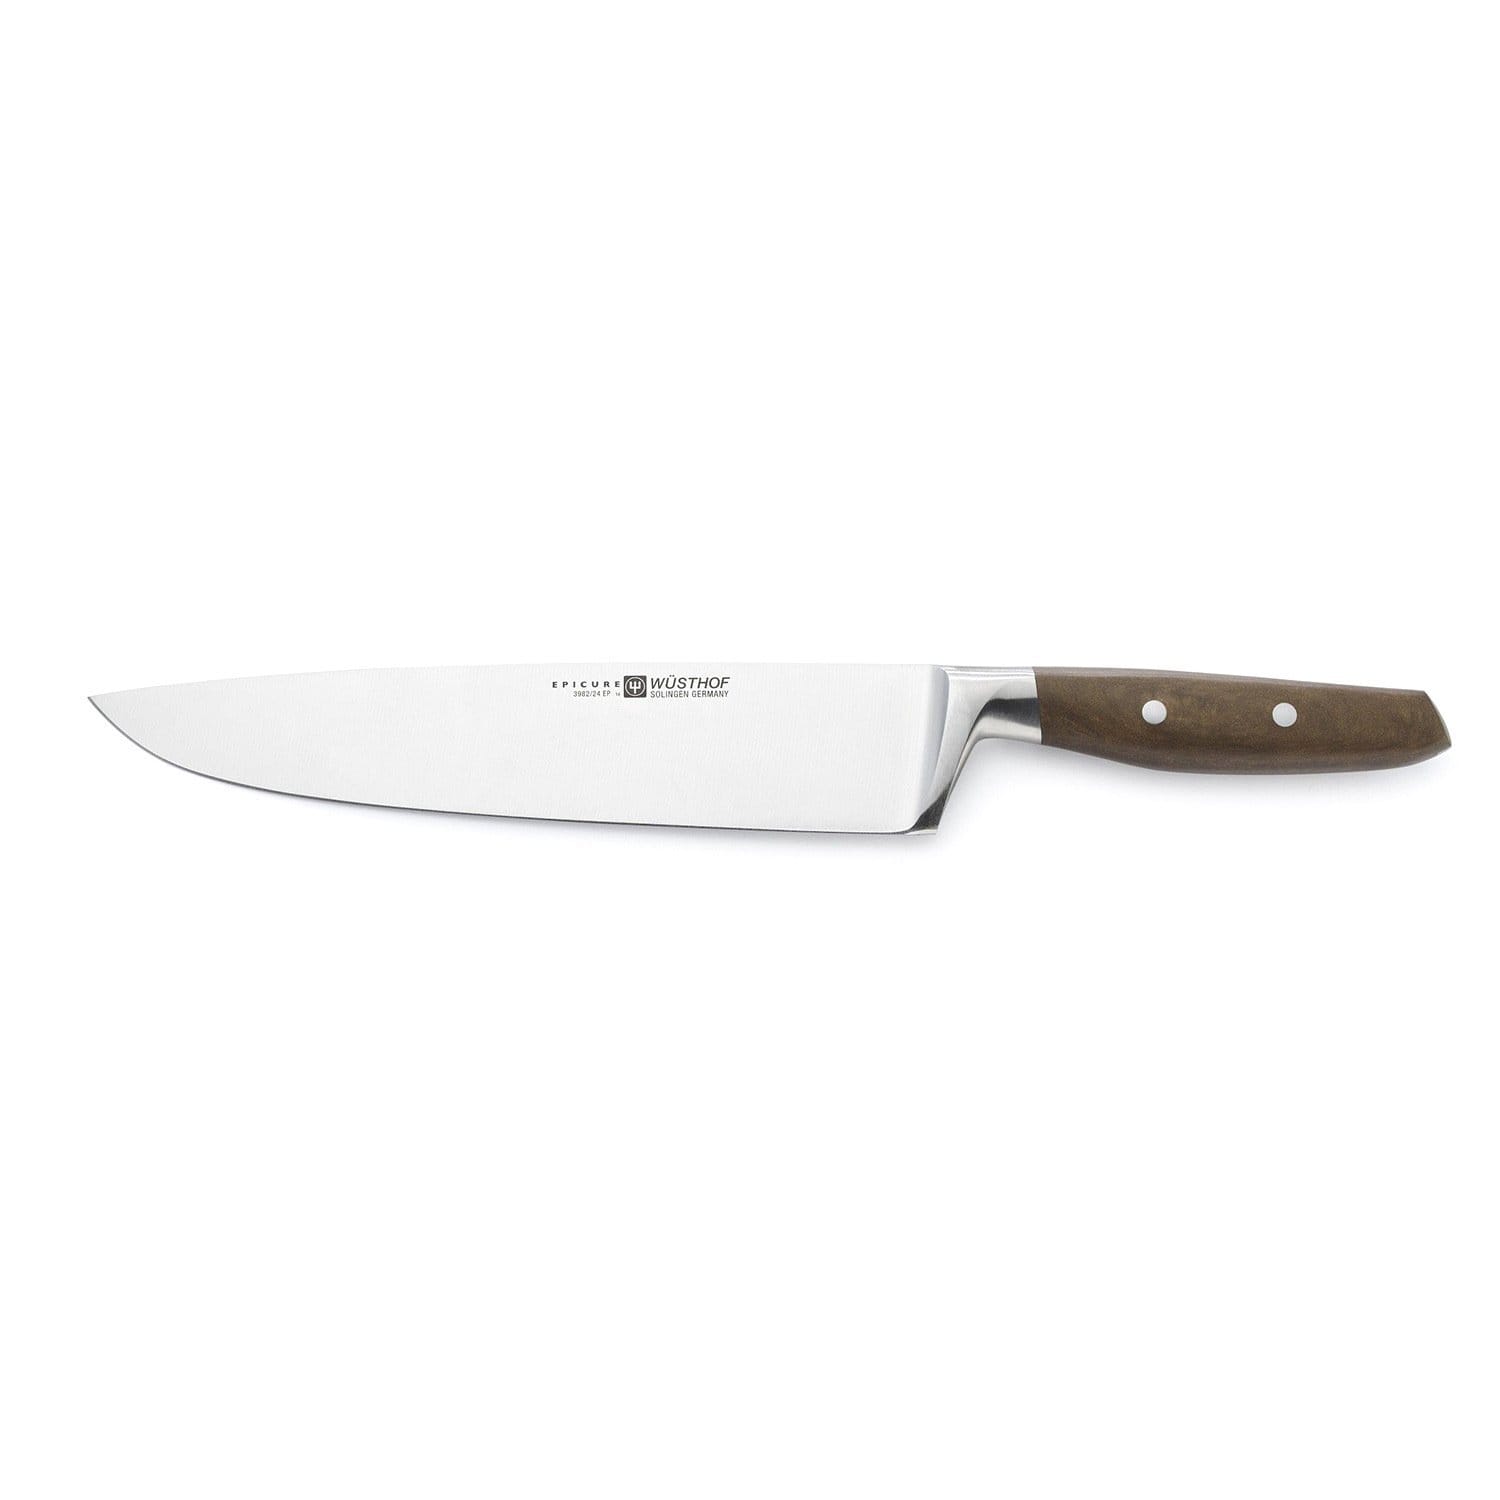 Wusthof Epicure 24 cm Chef's Knife - Brown and Silver - 3982/24 - Jashanmal Home